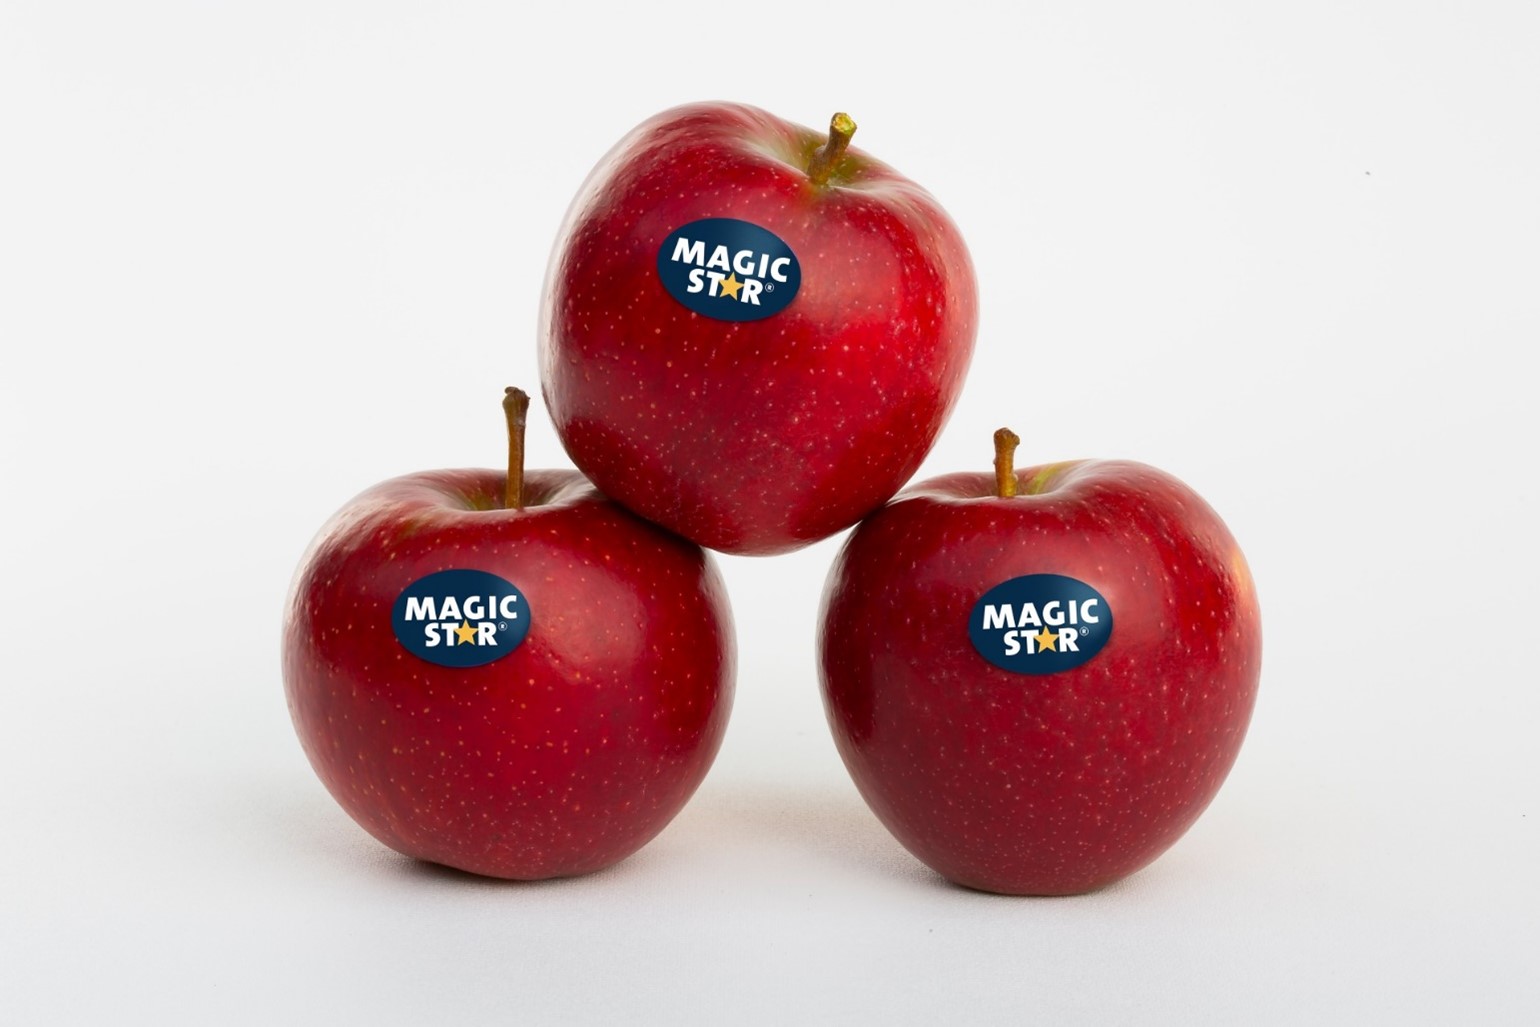 Magic Star apple nears commercial debut in the U.S. - Fruit Growers News